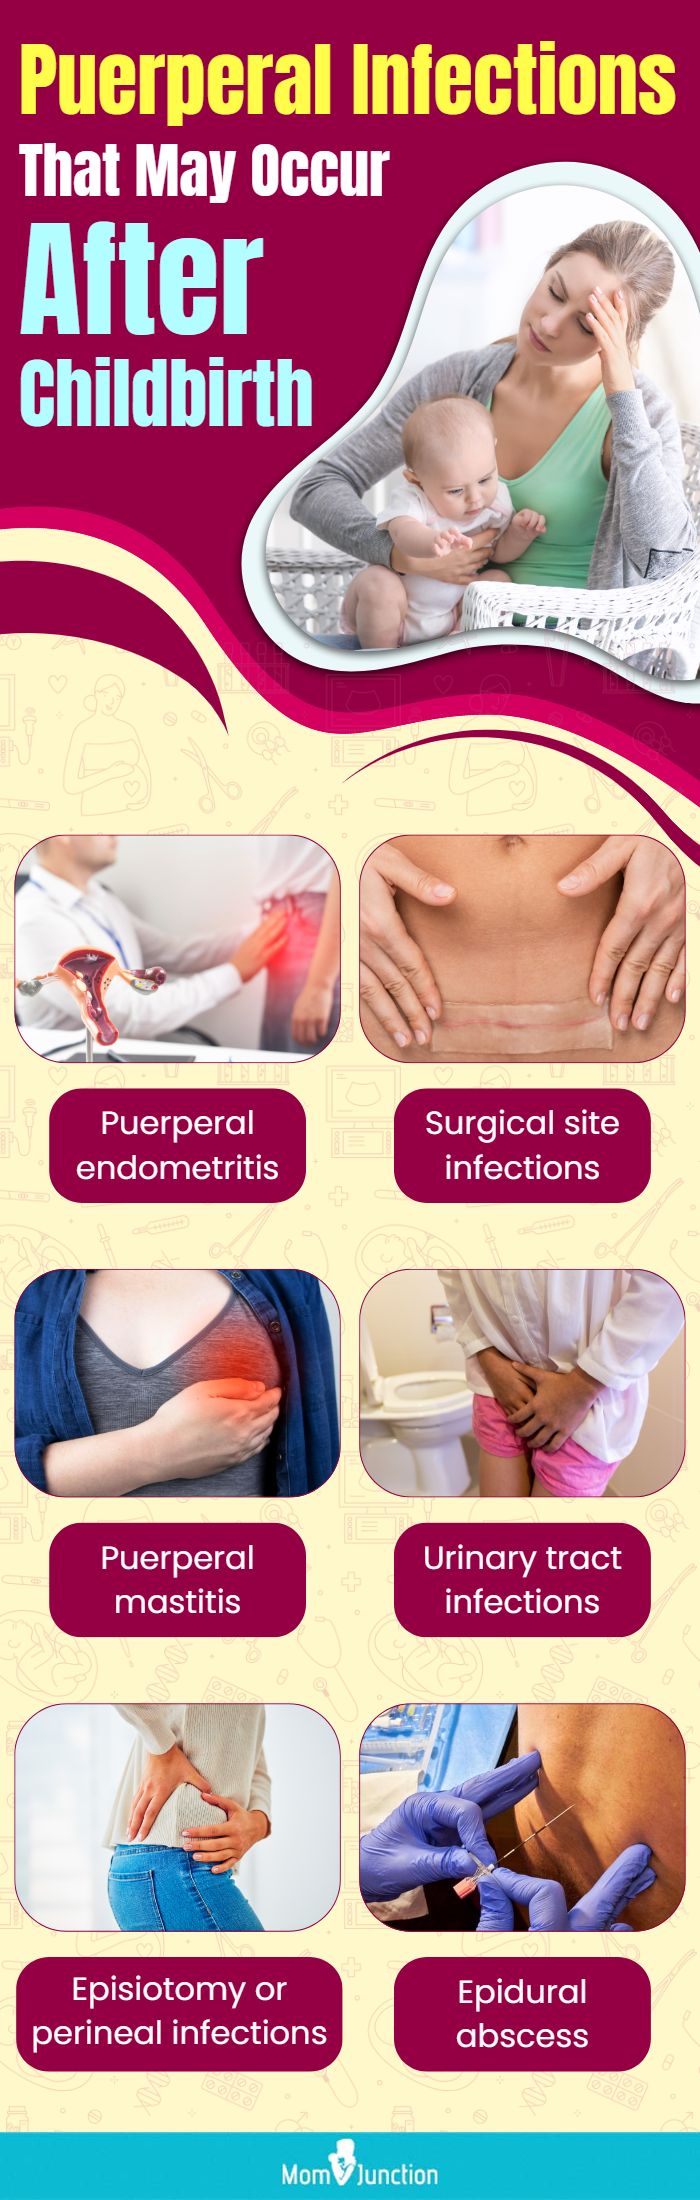 puerperal infections that may occur after childbirth(infographic)